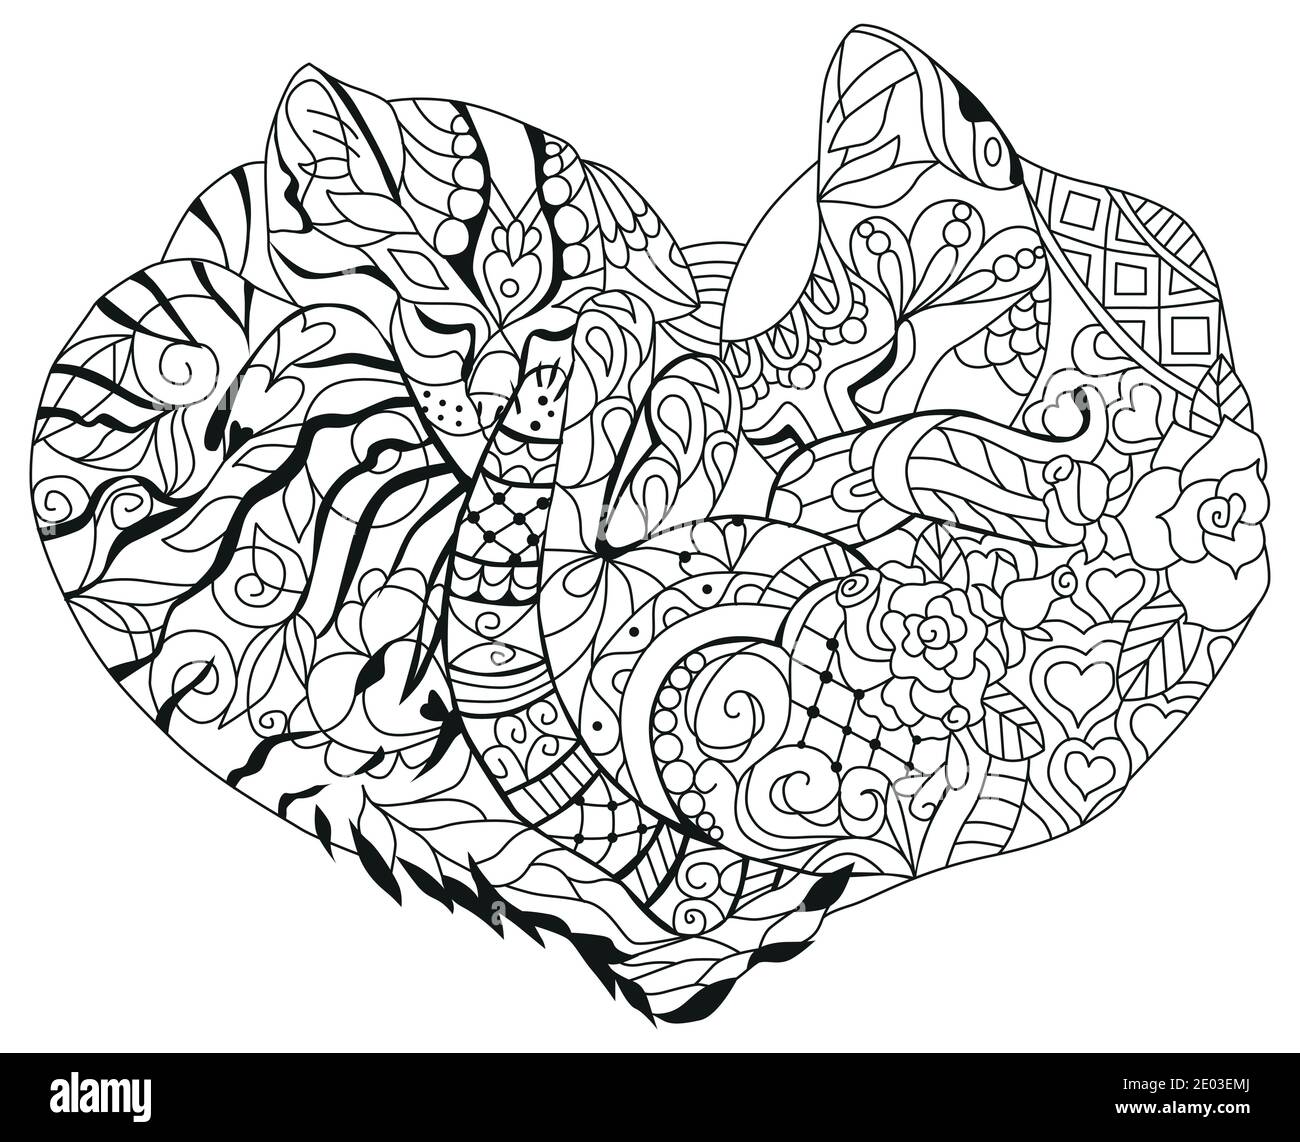 Page 2  Heart coloring book adults Vectors & Illustrations for